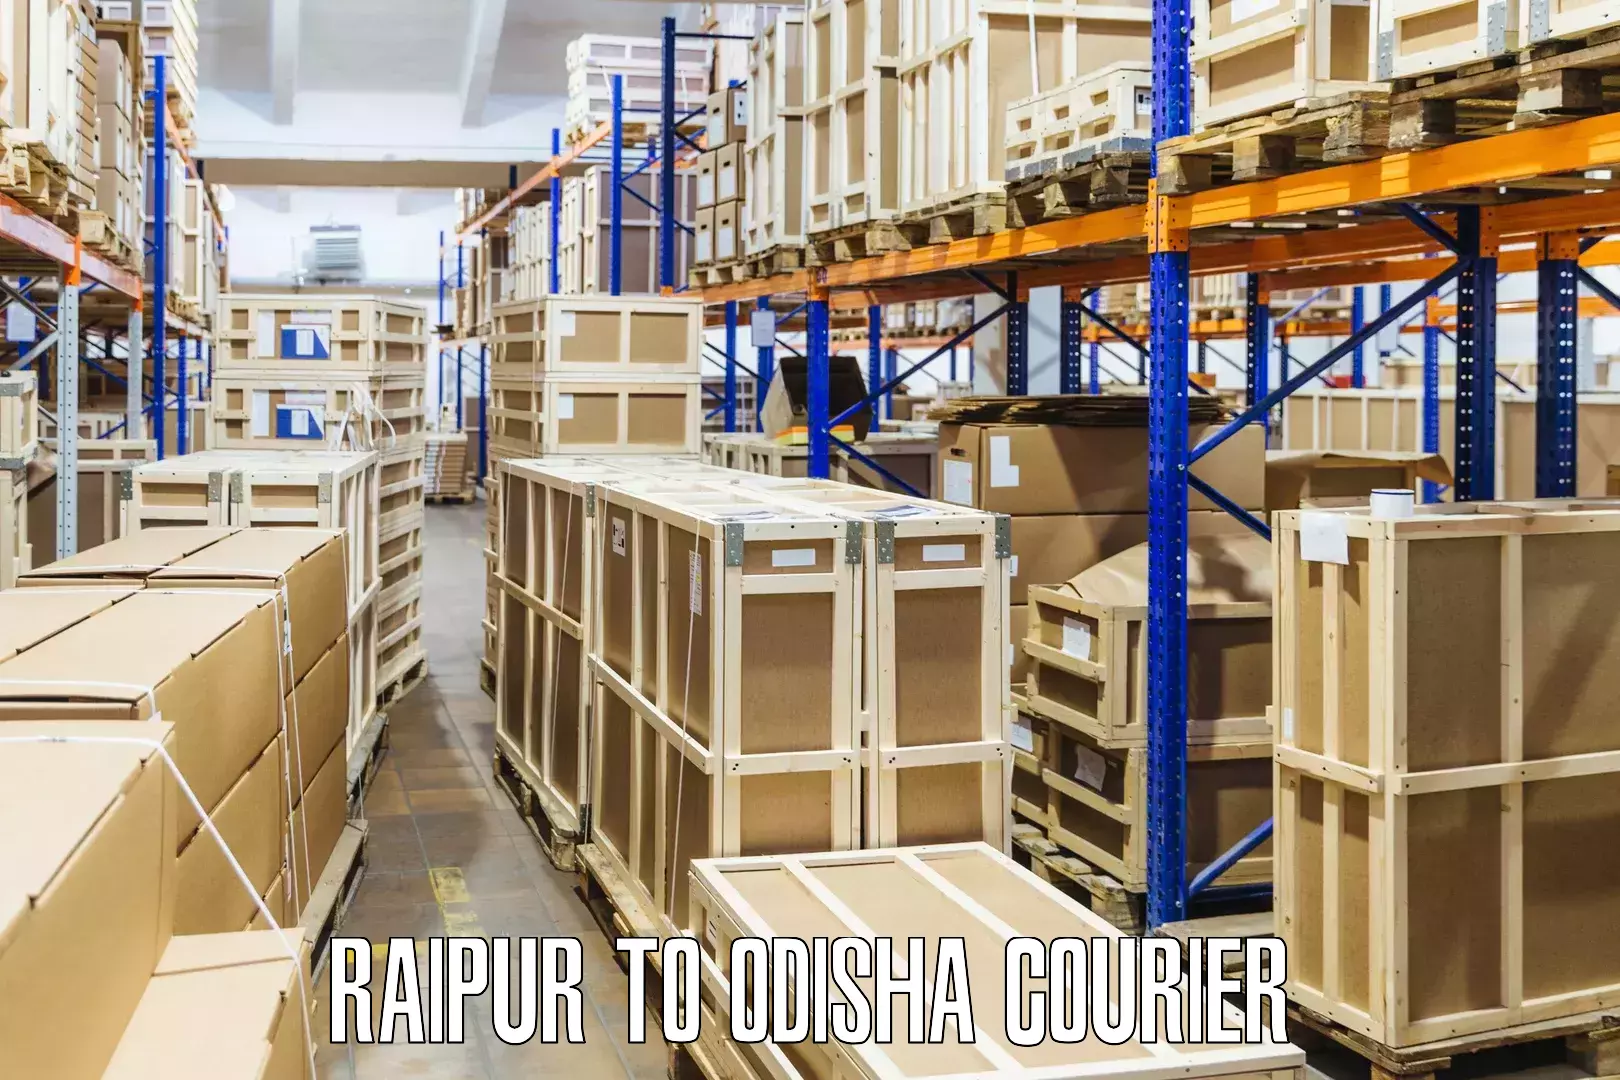 24/7 courier service Raipur to Paradip Port